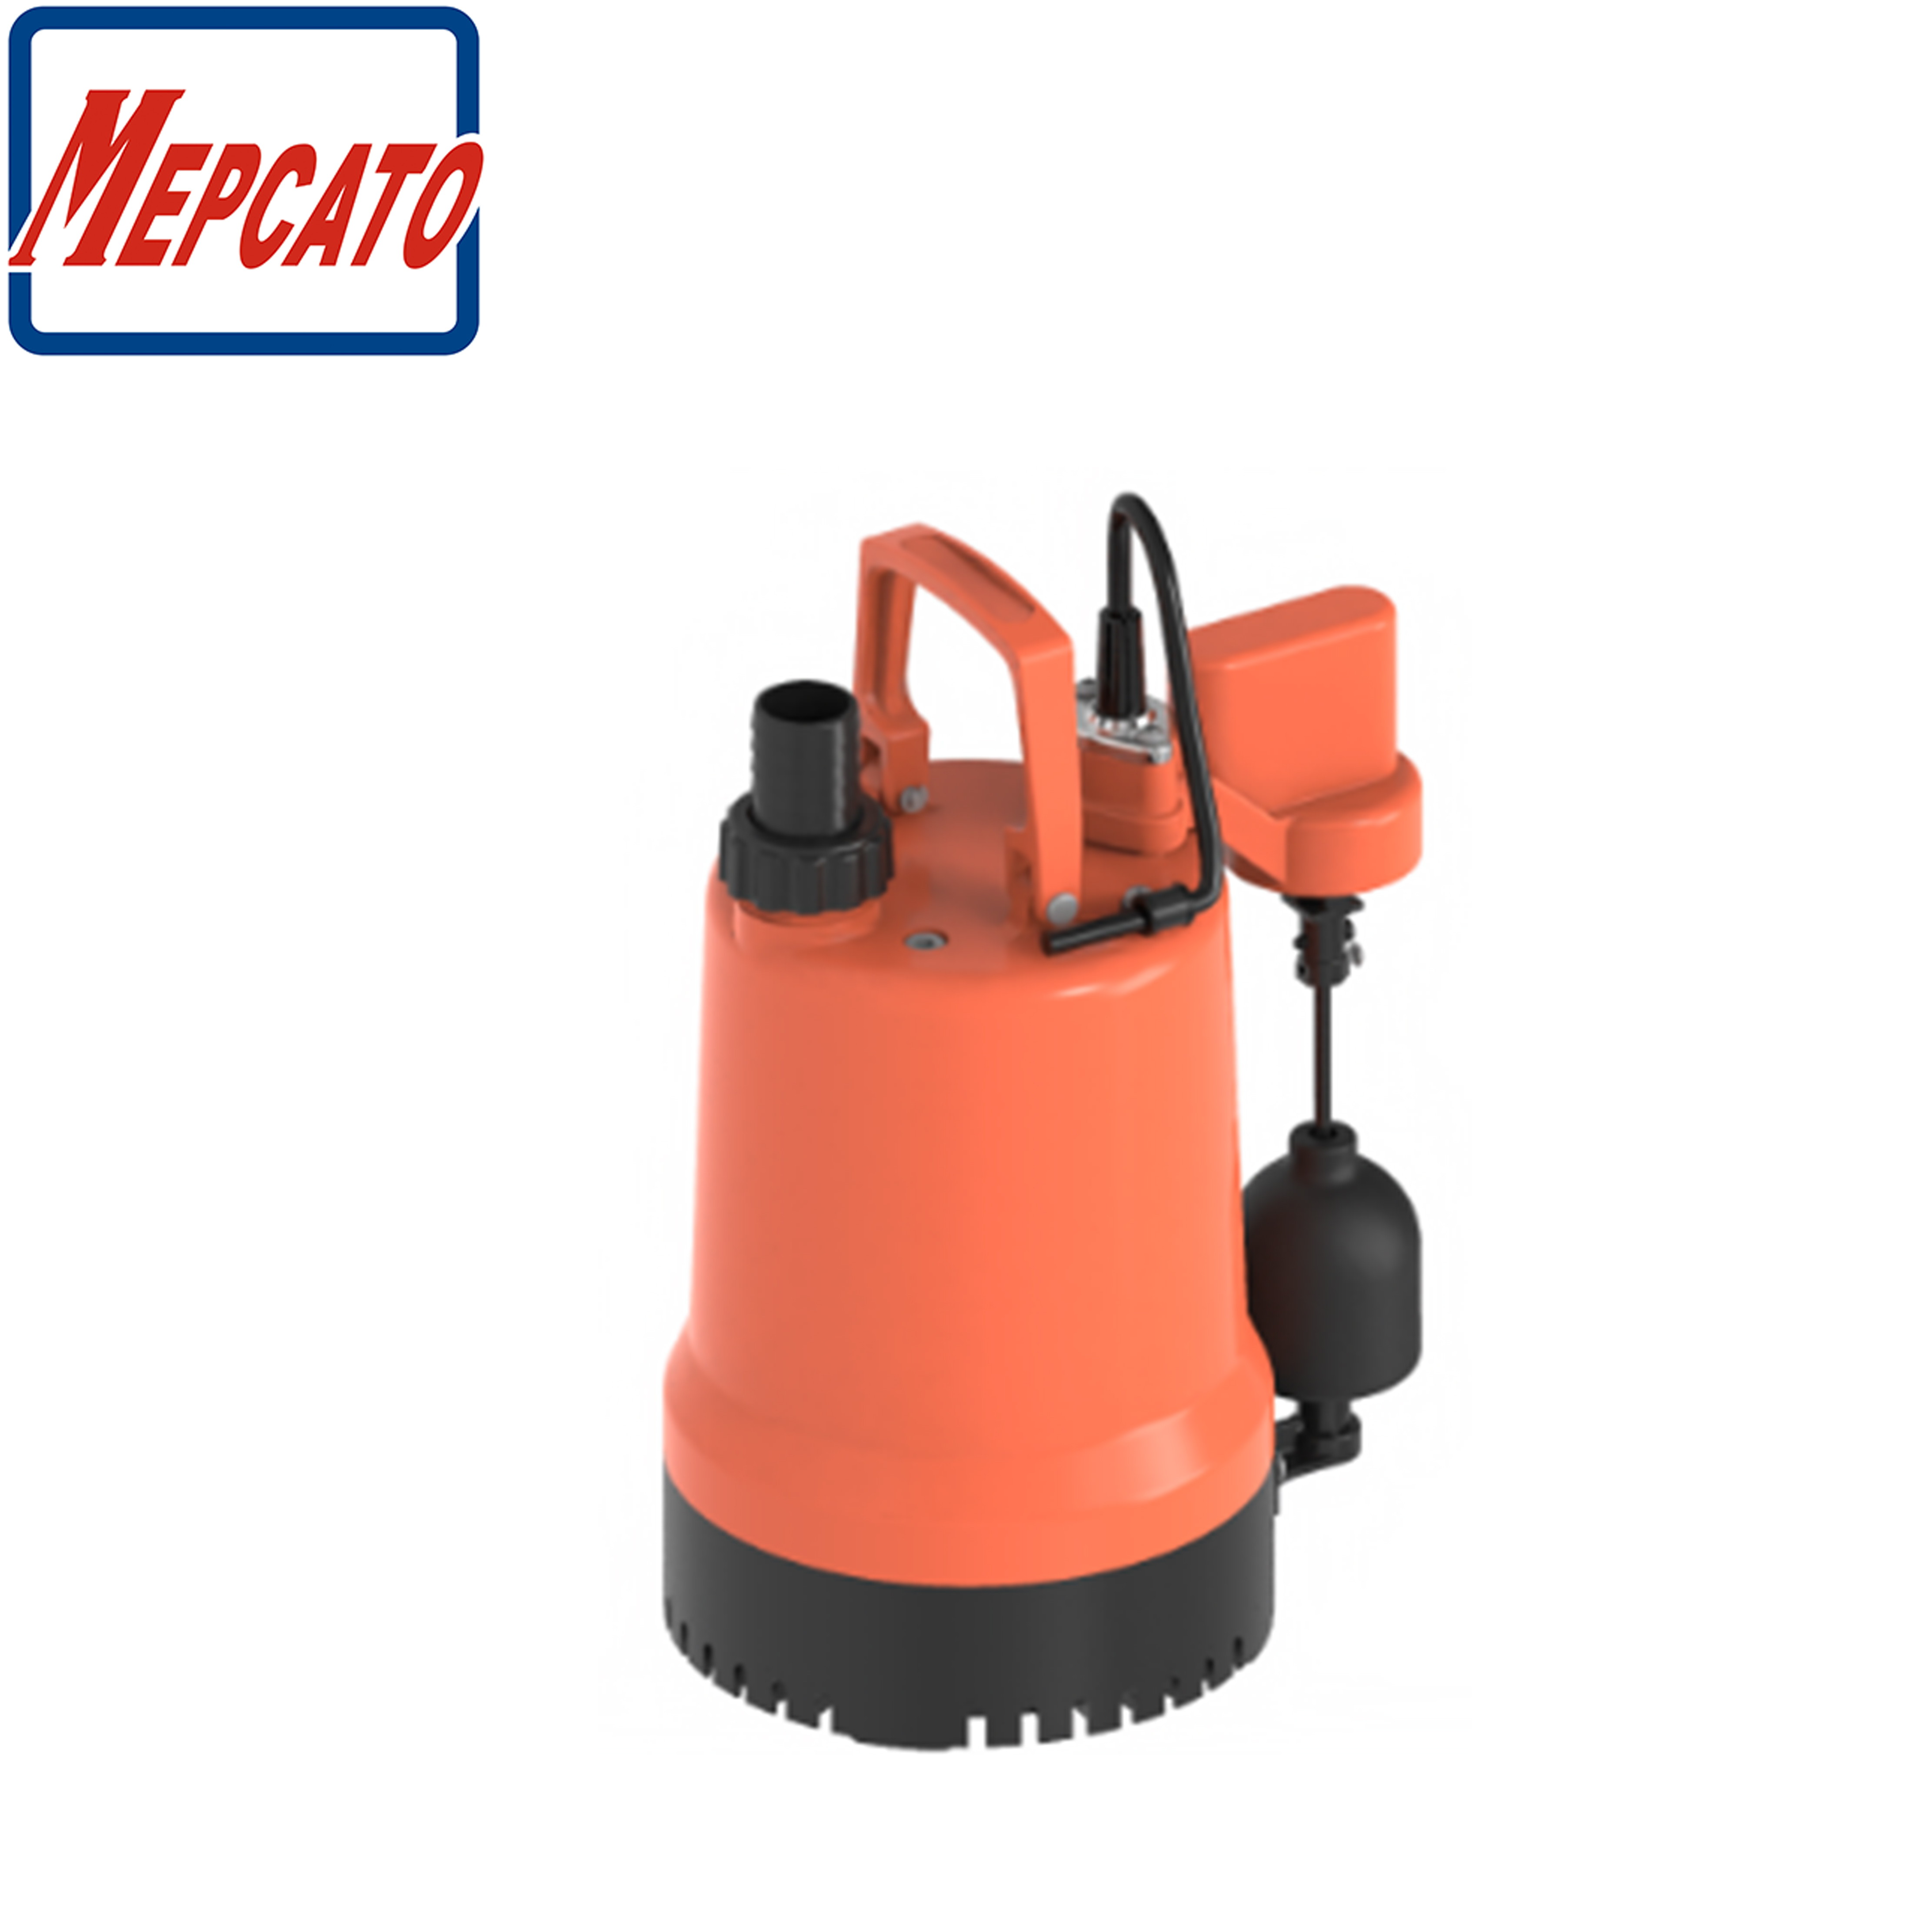 MF-250 Plastic Submersible Sea Water Pump with Floater